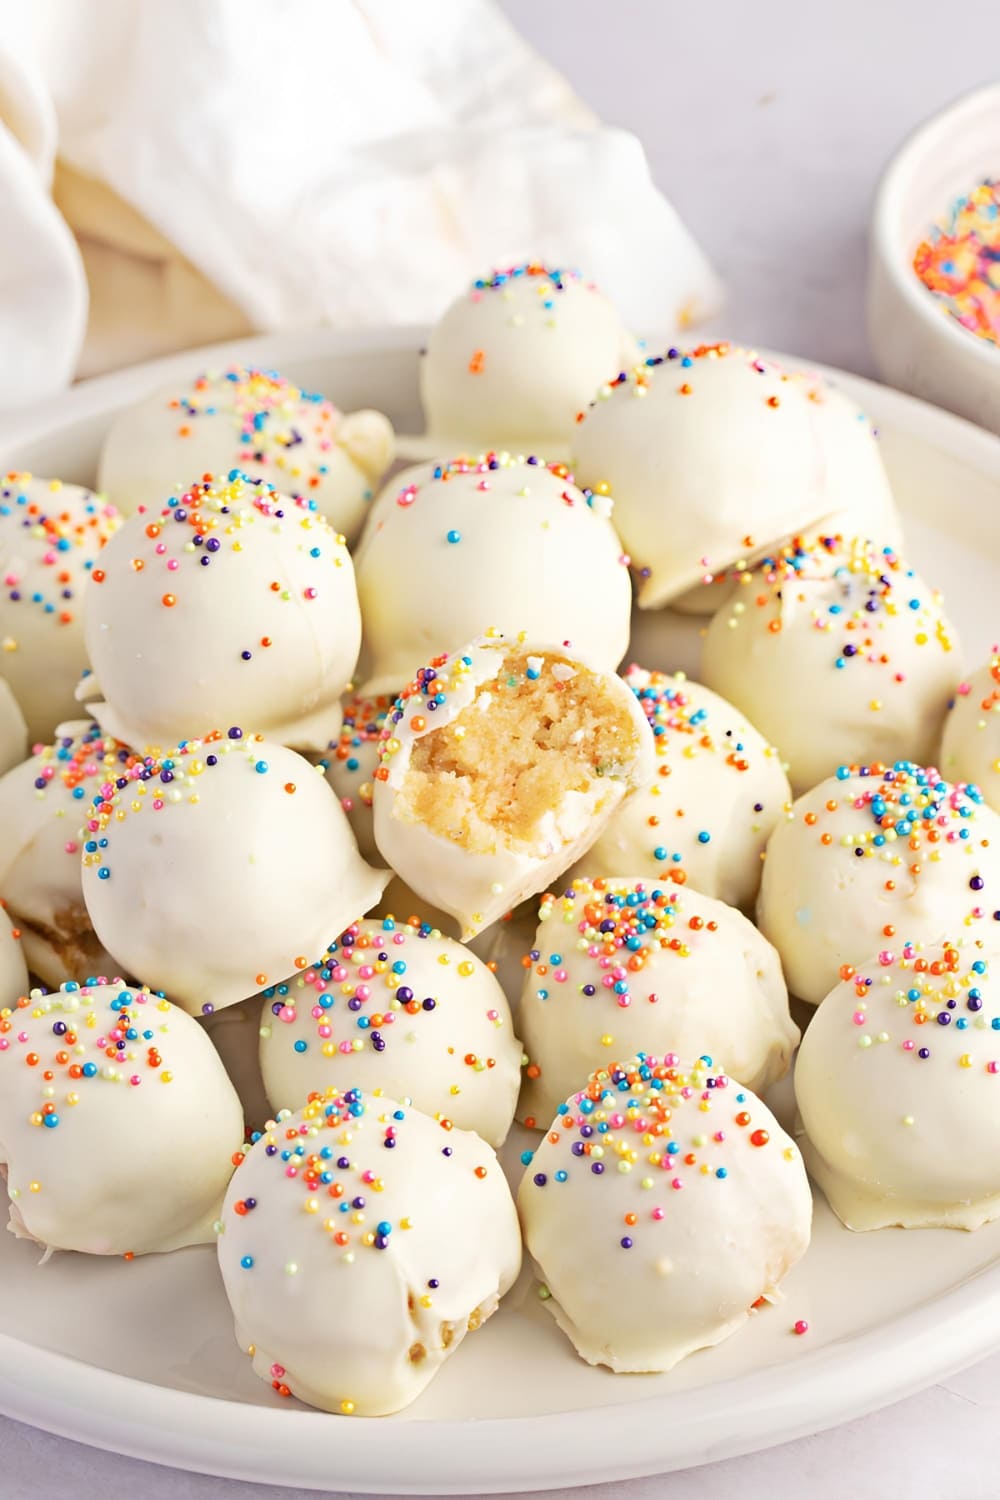 Plate Full of Cake Balls with Sprinkle Toppings